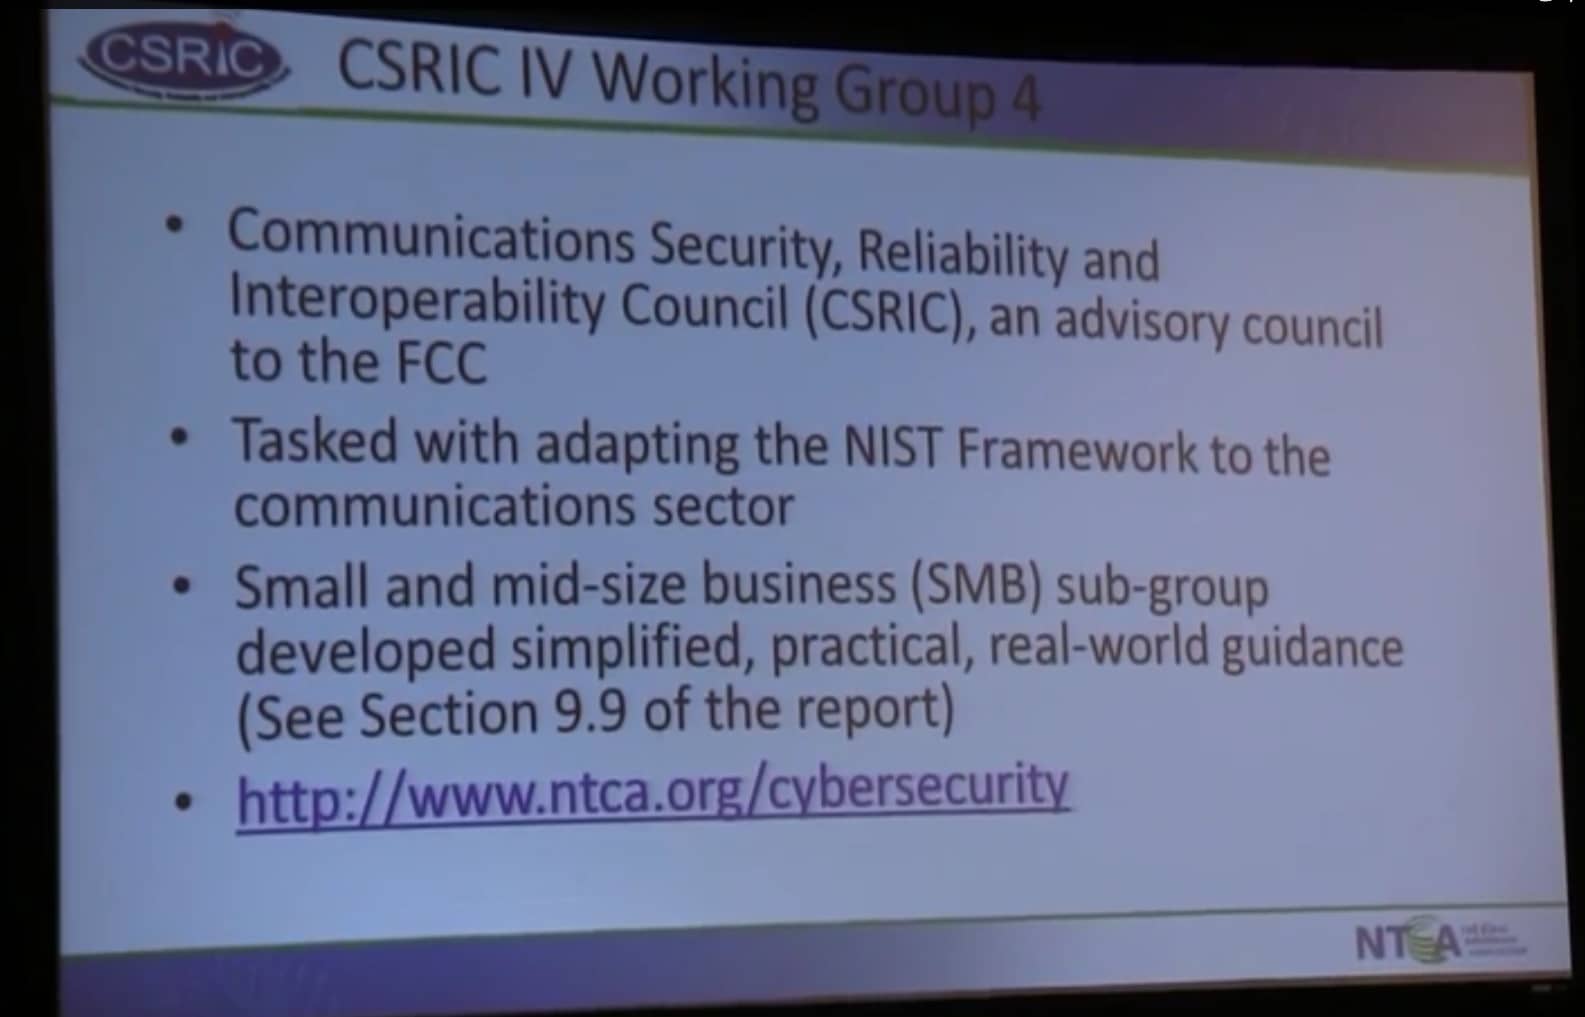 Some of the resources that can be found at NTCA's web site, including a link to CSRIC .